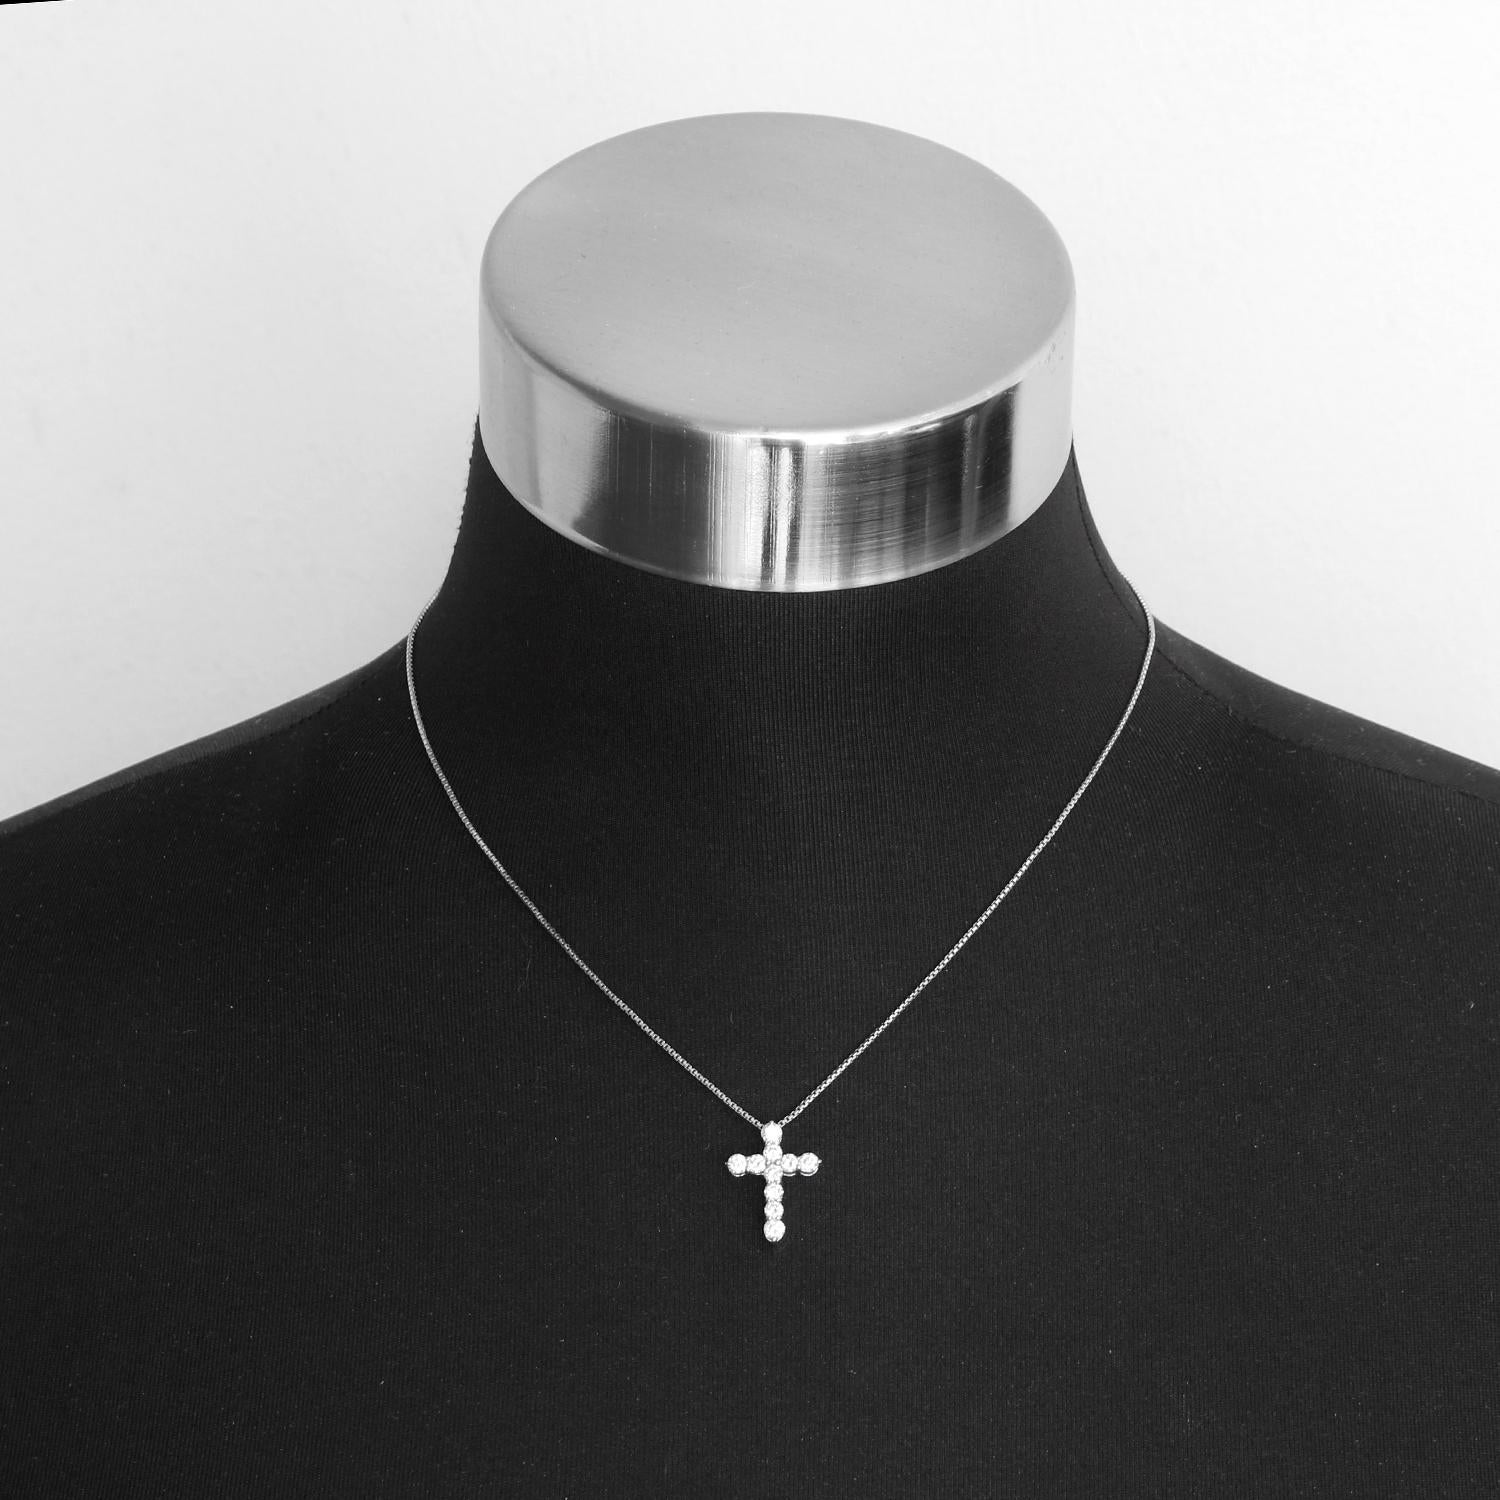 18K White Gold Diamond Cross Necklace - Beautiful cross set in 18K White gold measuring 1 cts of diamonds. Diamond color HI, Clarity VS1-2,  Bright white. On a chain measuring 16 inches with an enhancer. Pre-owned with custom box.